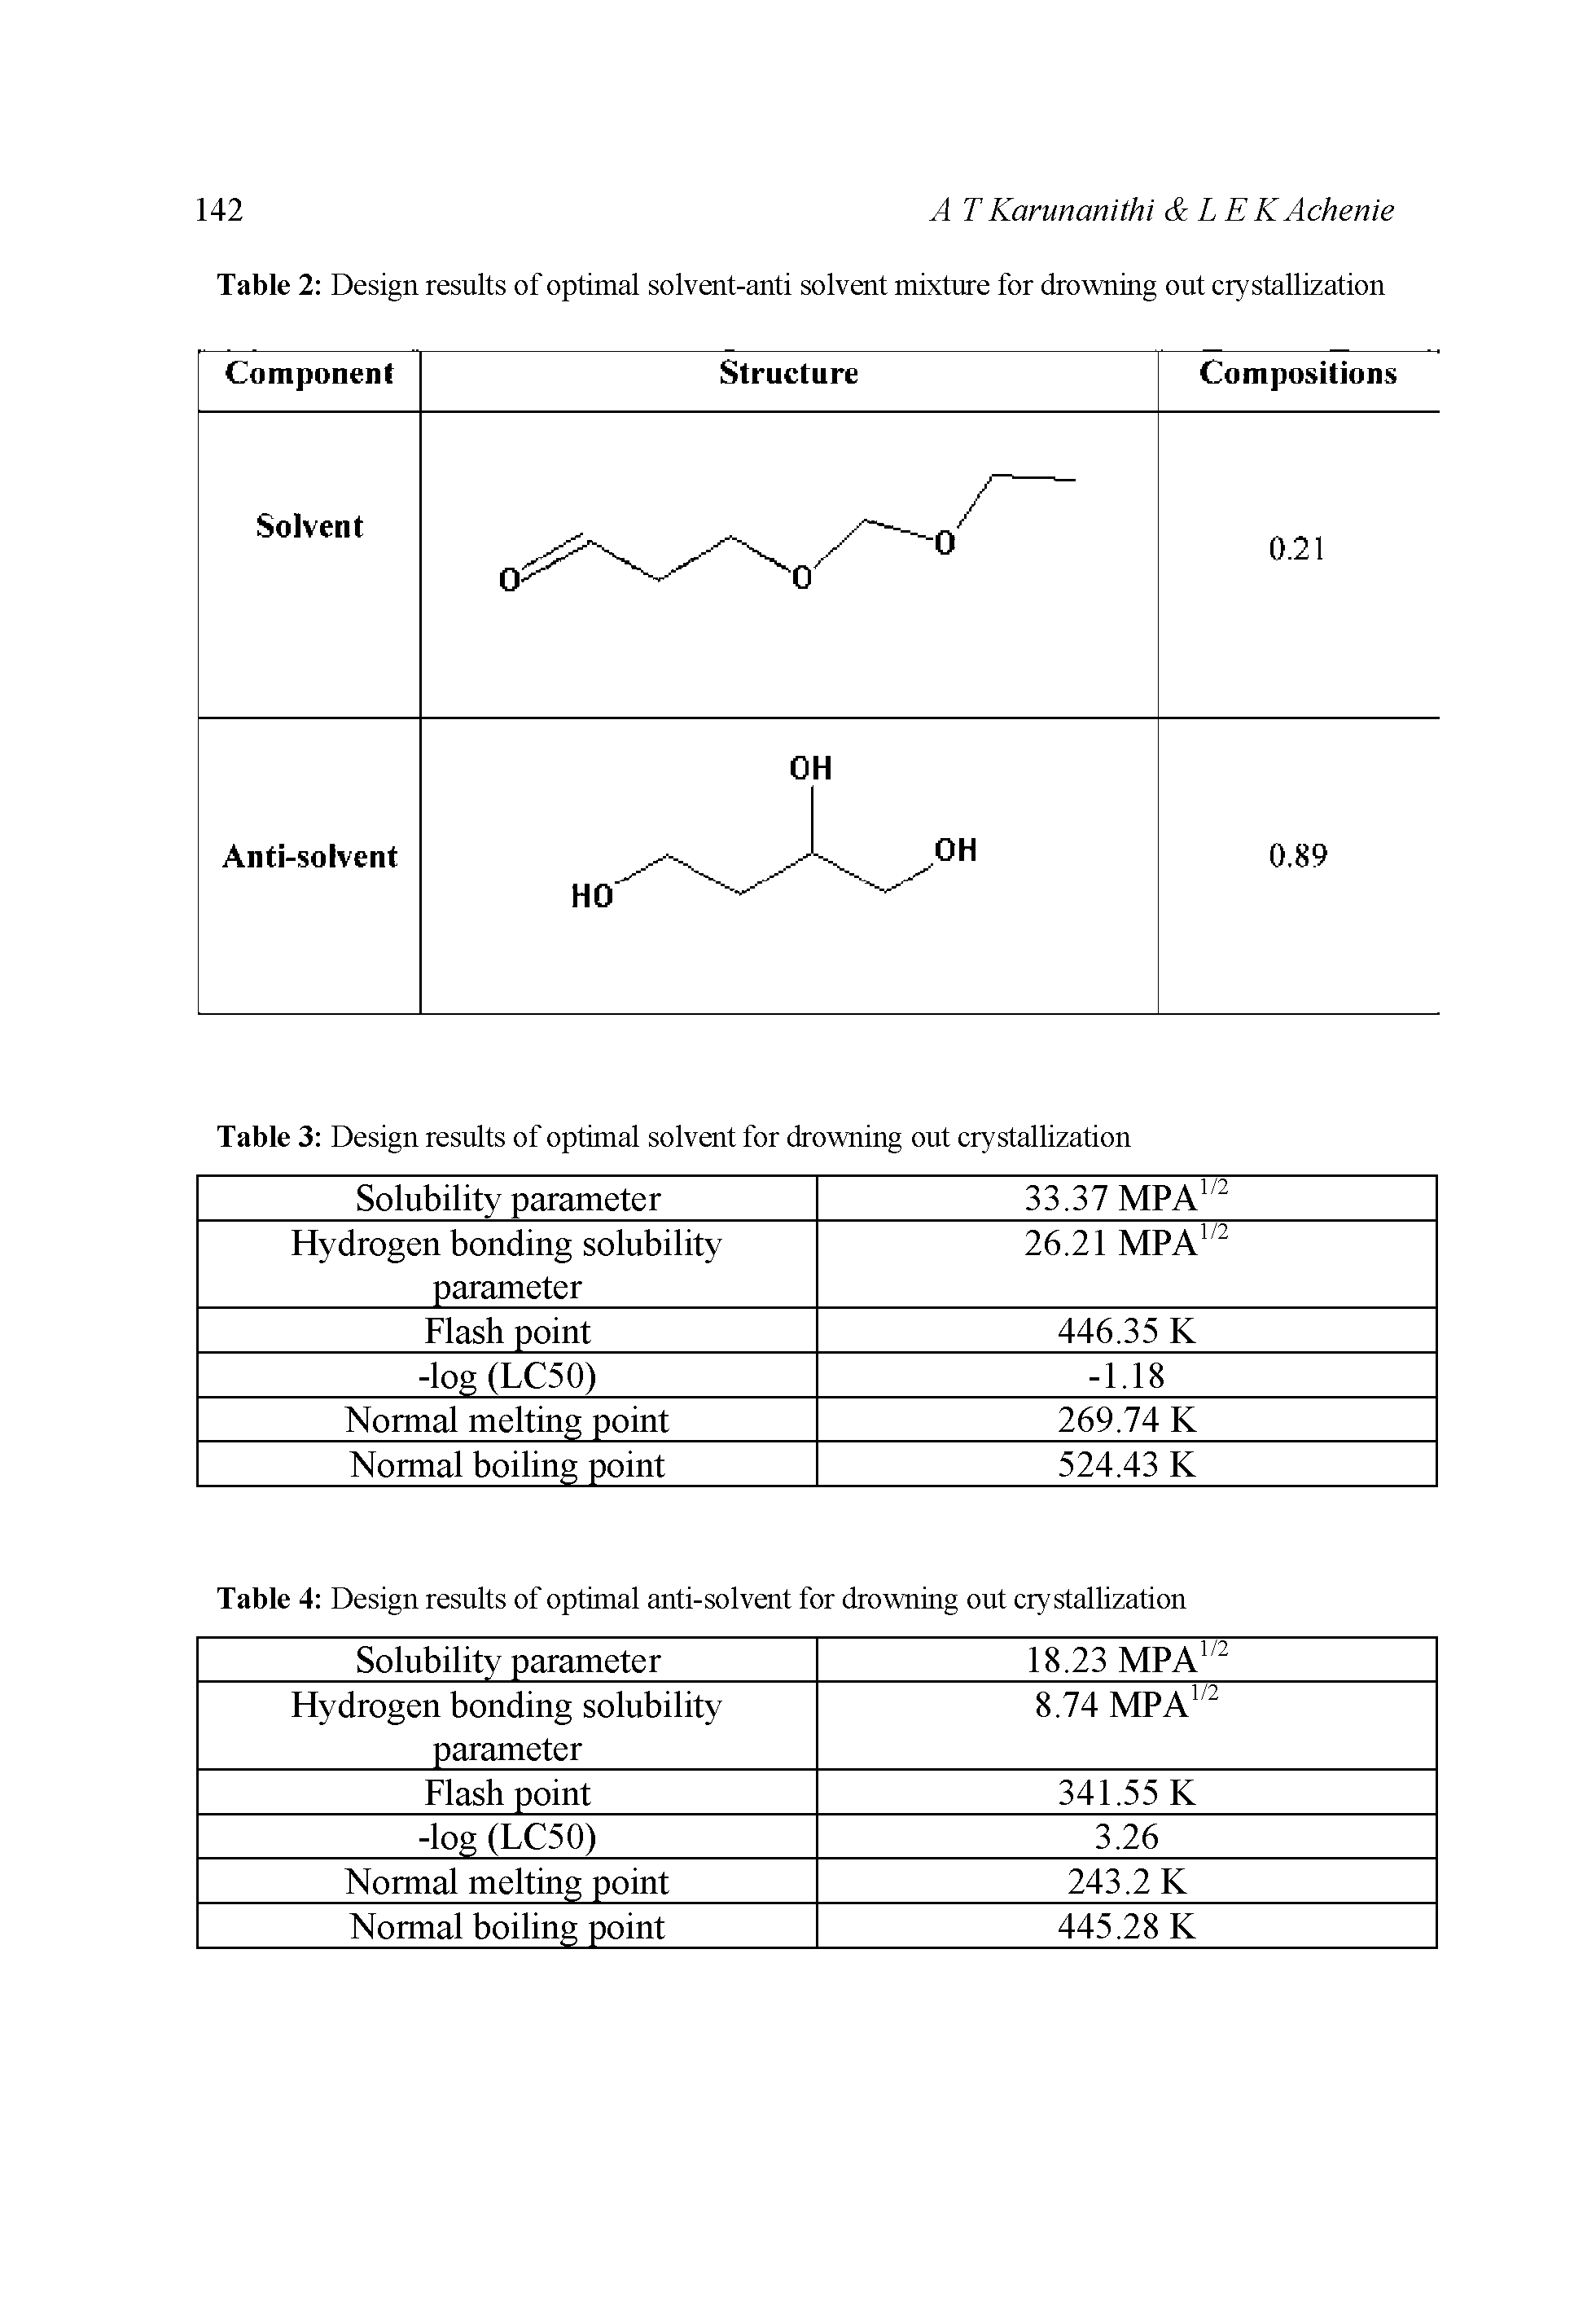 Table 4 Design results of optimal anti-solvent for drowning out crystallization...